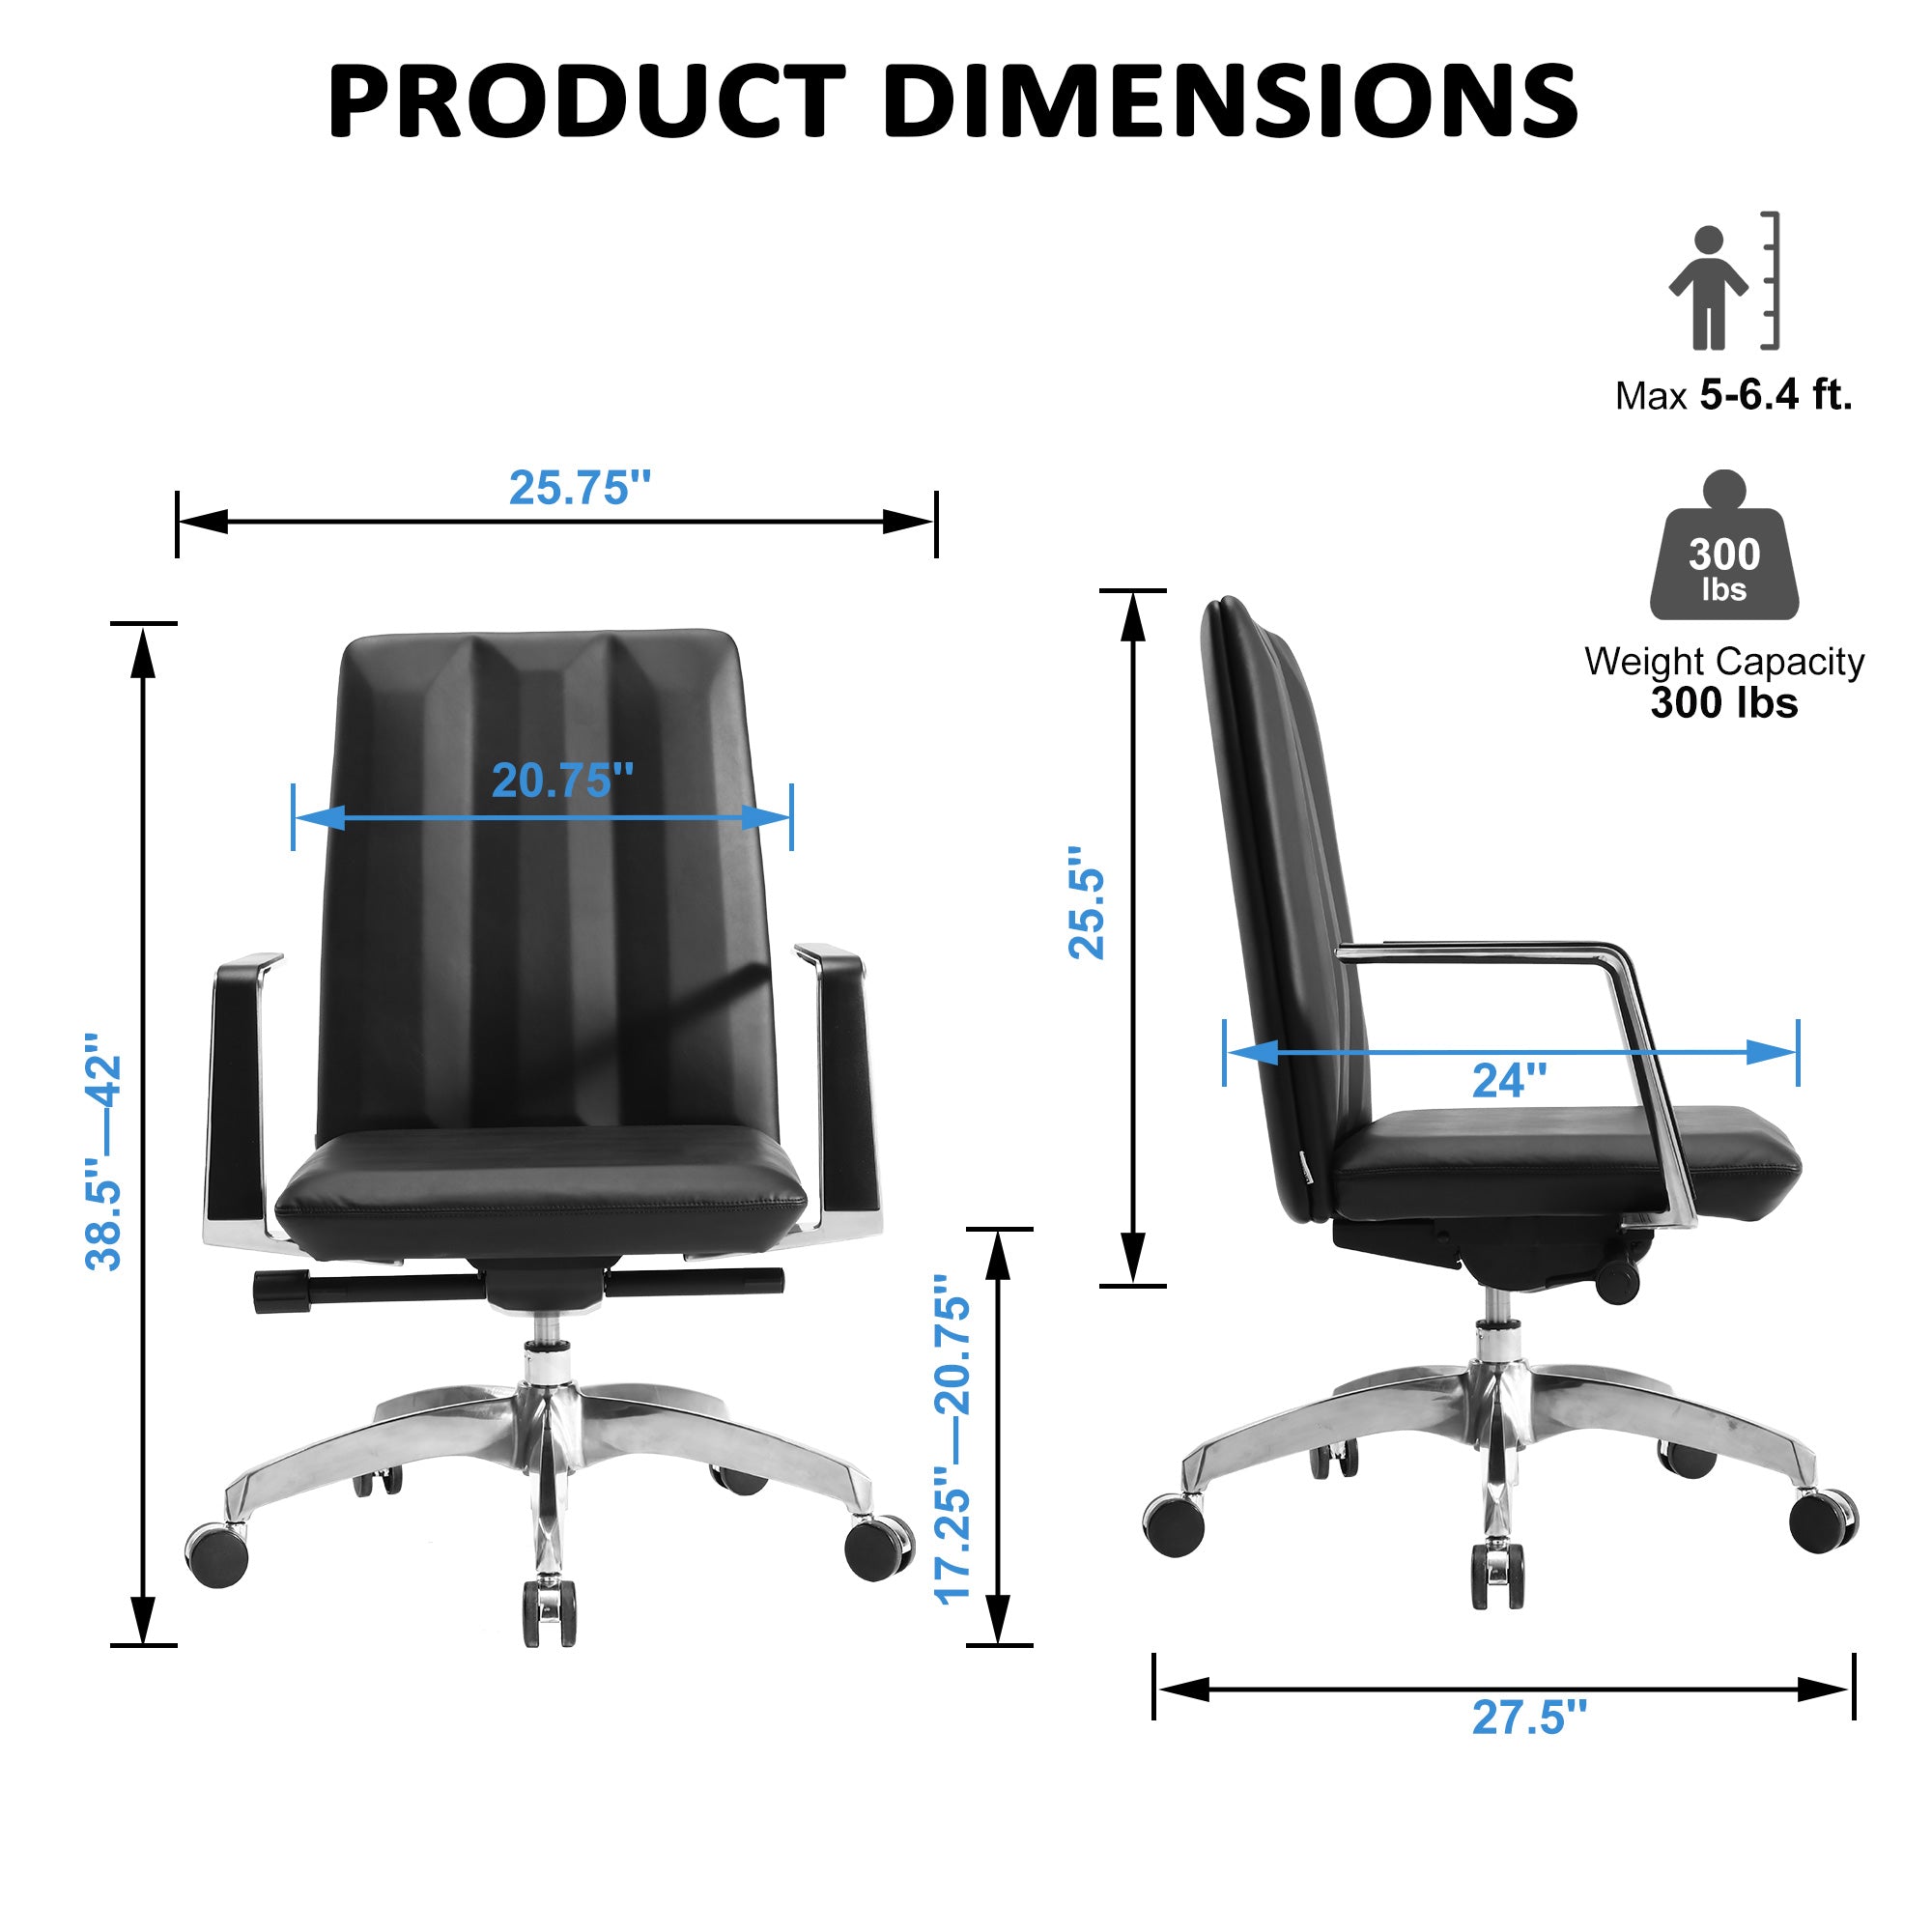 Low Back Chair, Ergonomic Leather Office Chair, Office Chair with Adjustable Height and Tilt Function, 360° Swivel, Large Tall Computer Chair, Black